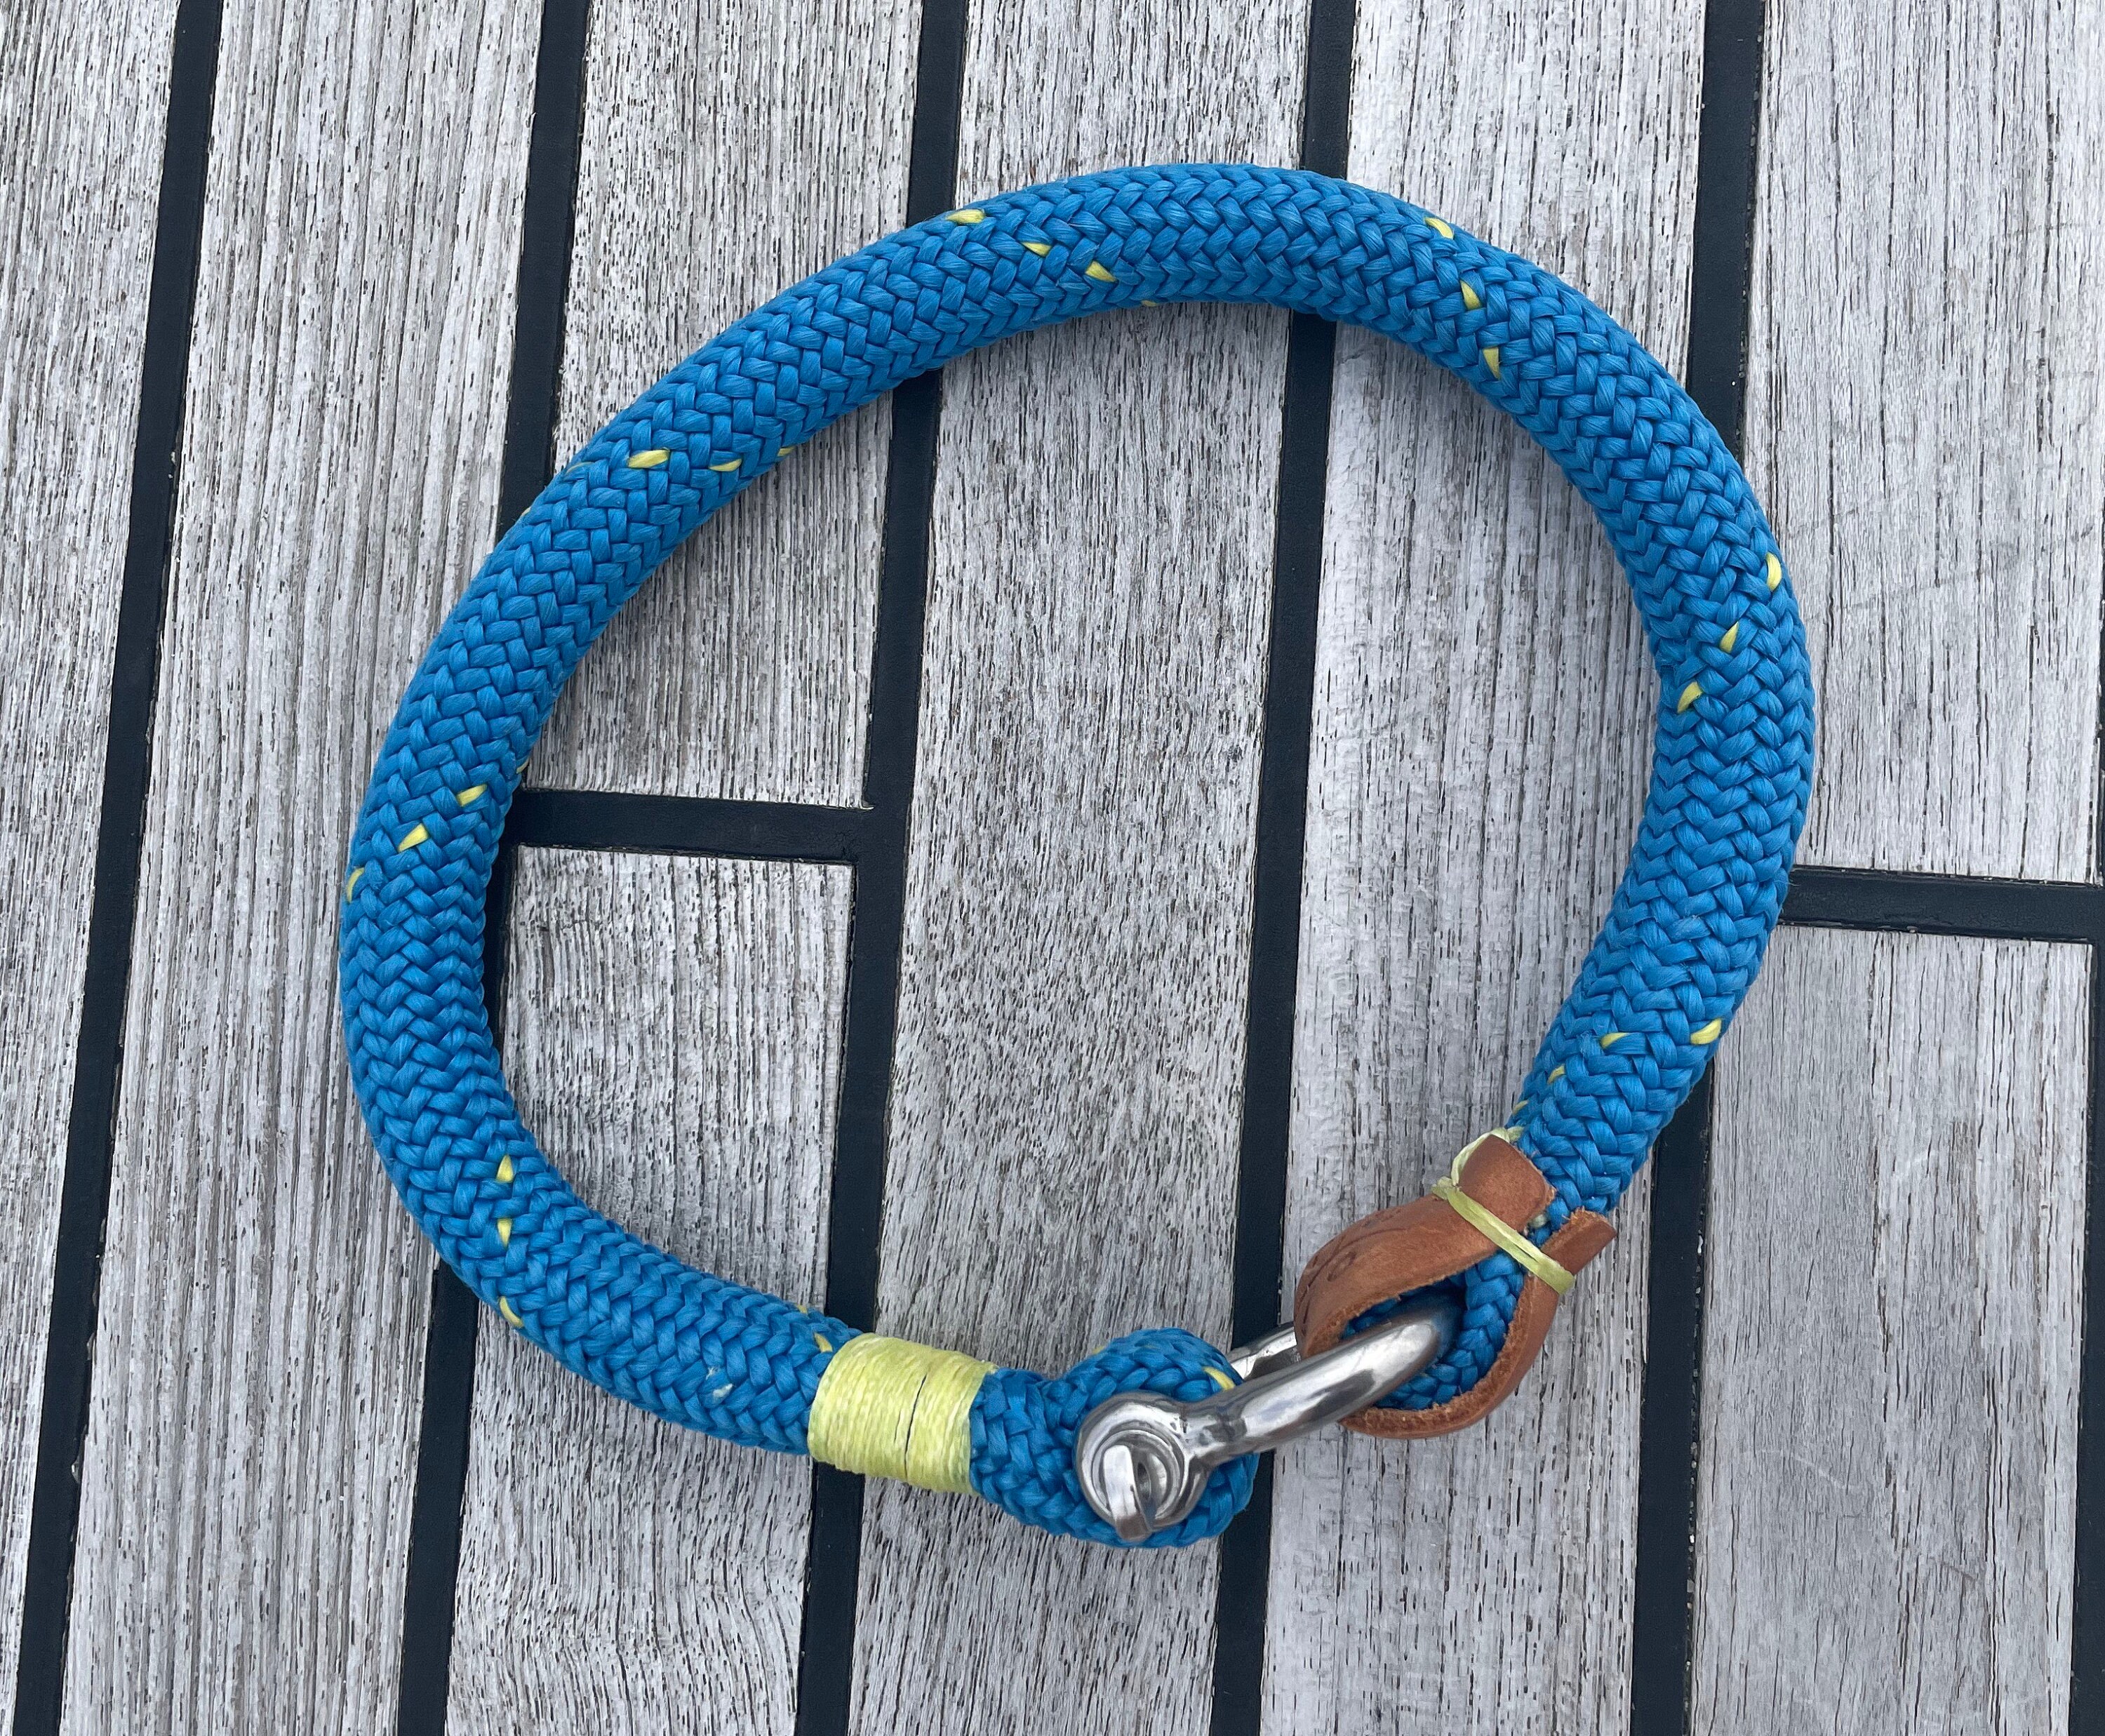 Nautical Rope Bracelet with Bronze Anchor - Helm & Harbor - Dog leashes,  dog collars, nautical accessories and more - Helm and Harbor